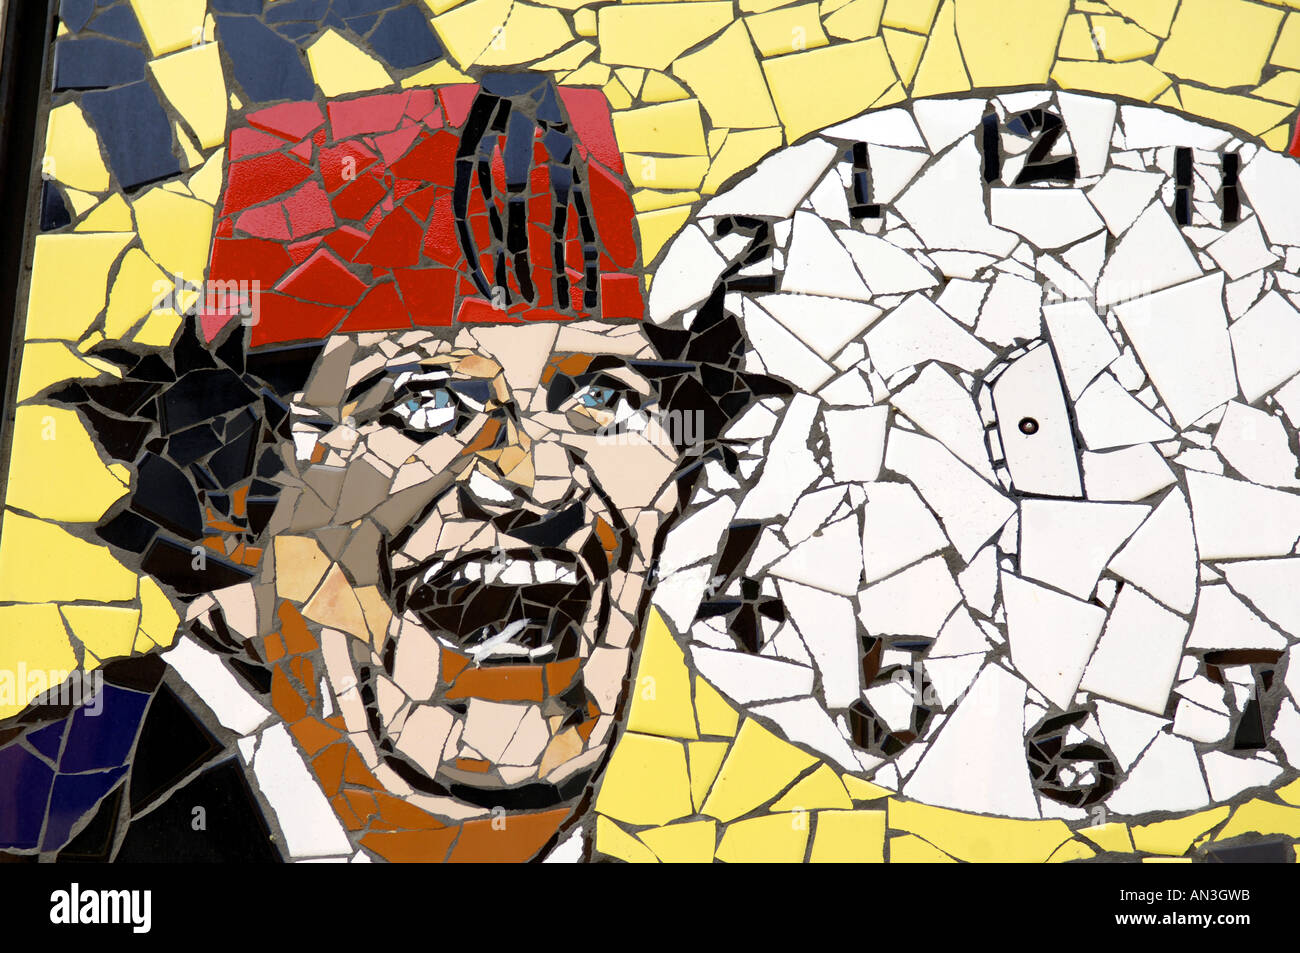 sign tommy cooper mosaic Afflecks palace shopping centre designers youth urban popular culture music scene teenage the northern Stock Photo